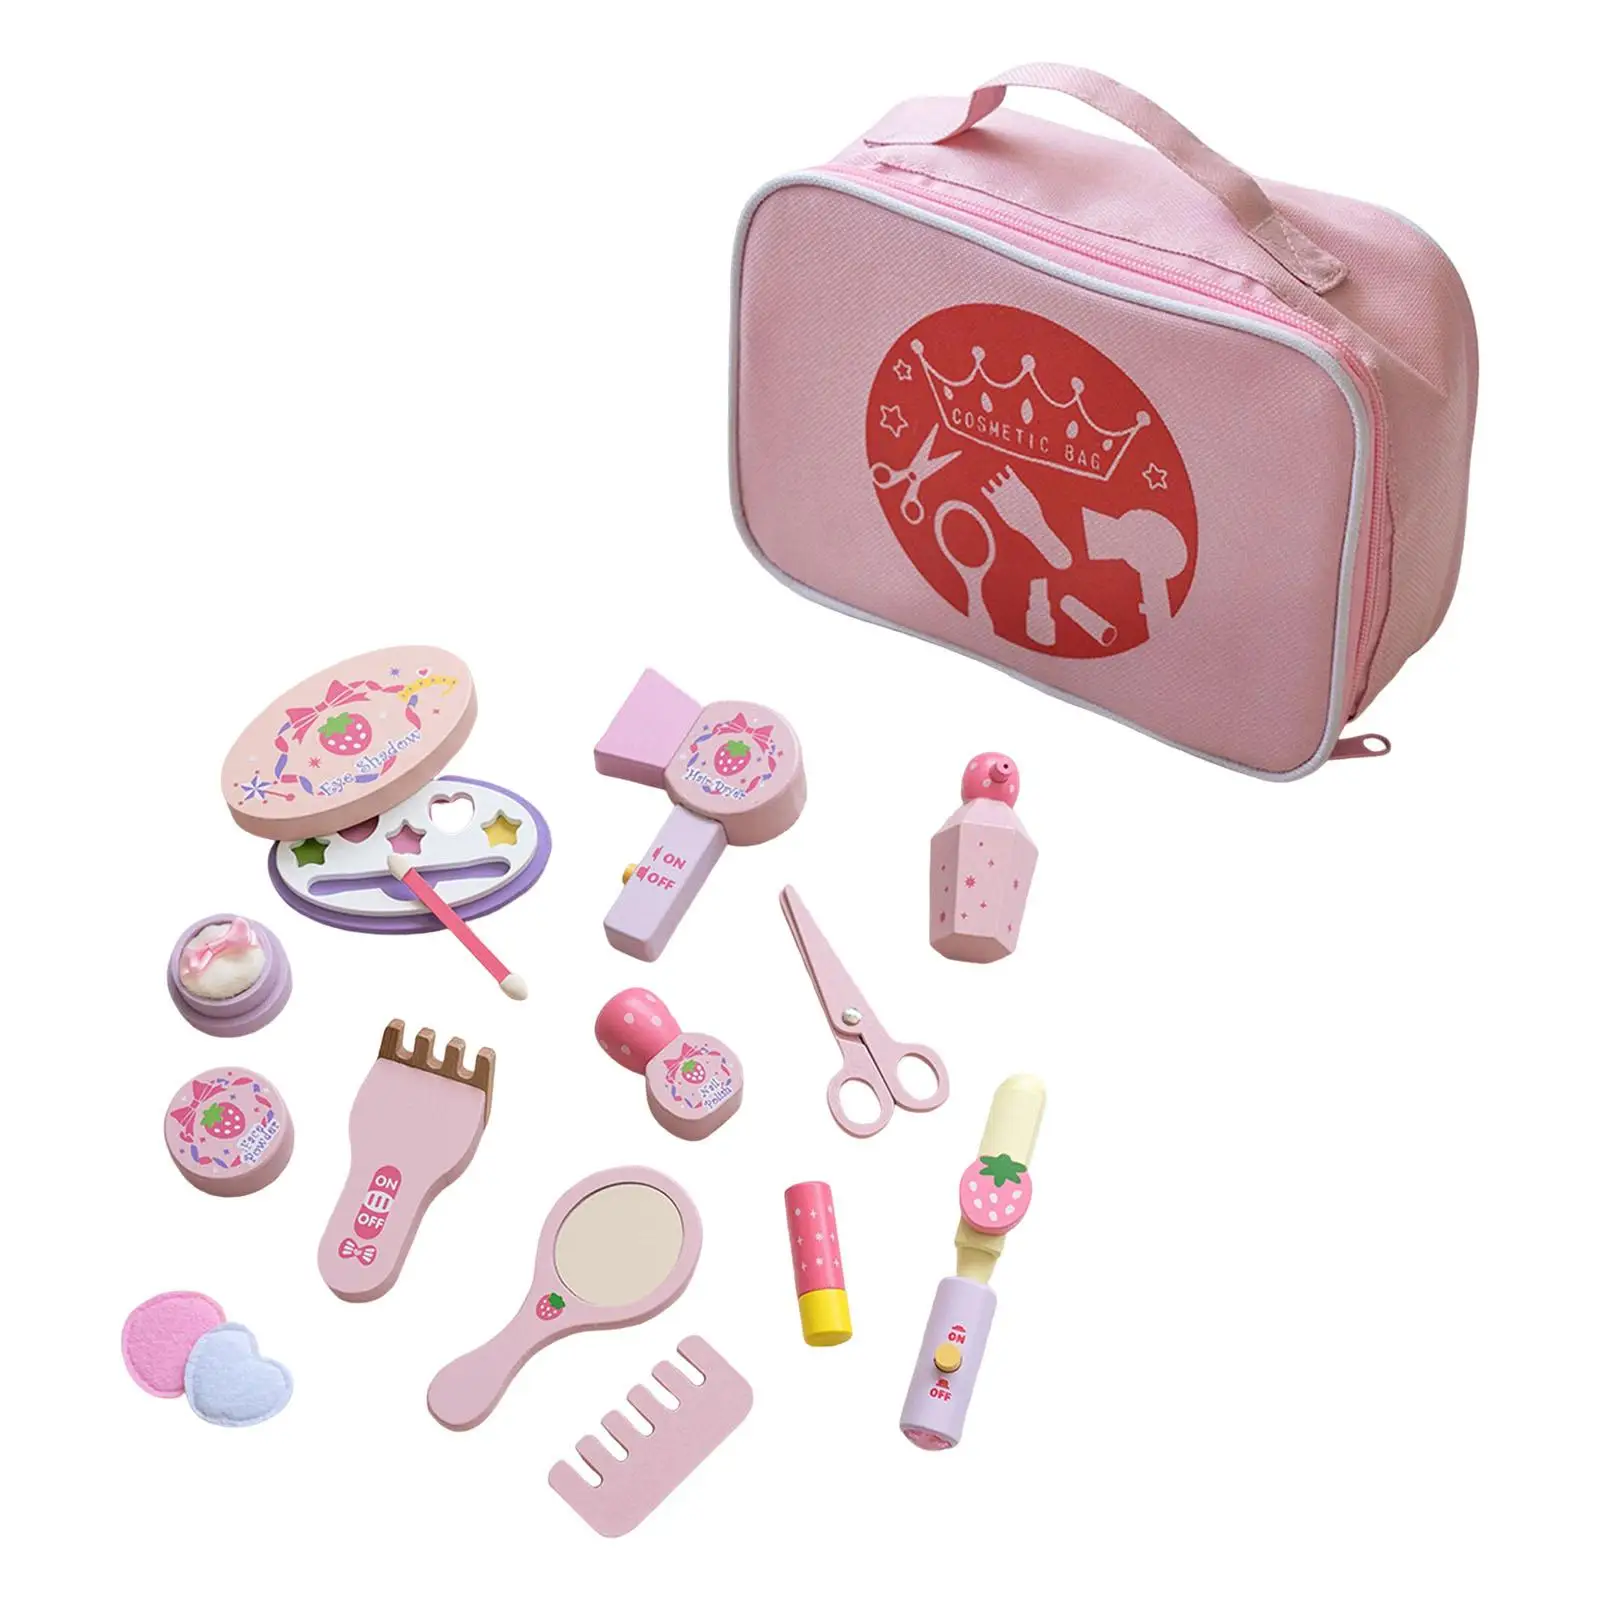 Miniature Pretend Makeup Game with Storage Bag Washable Wooden Party Favors